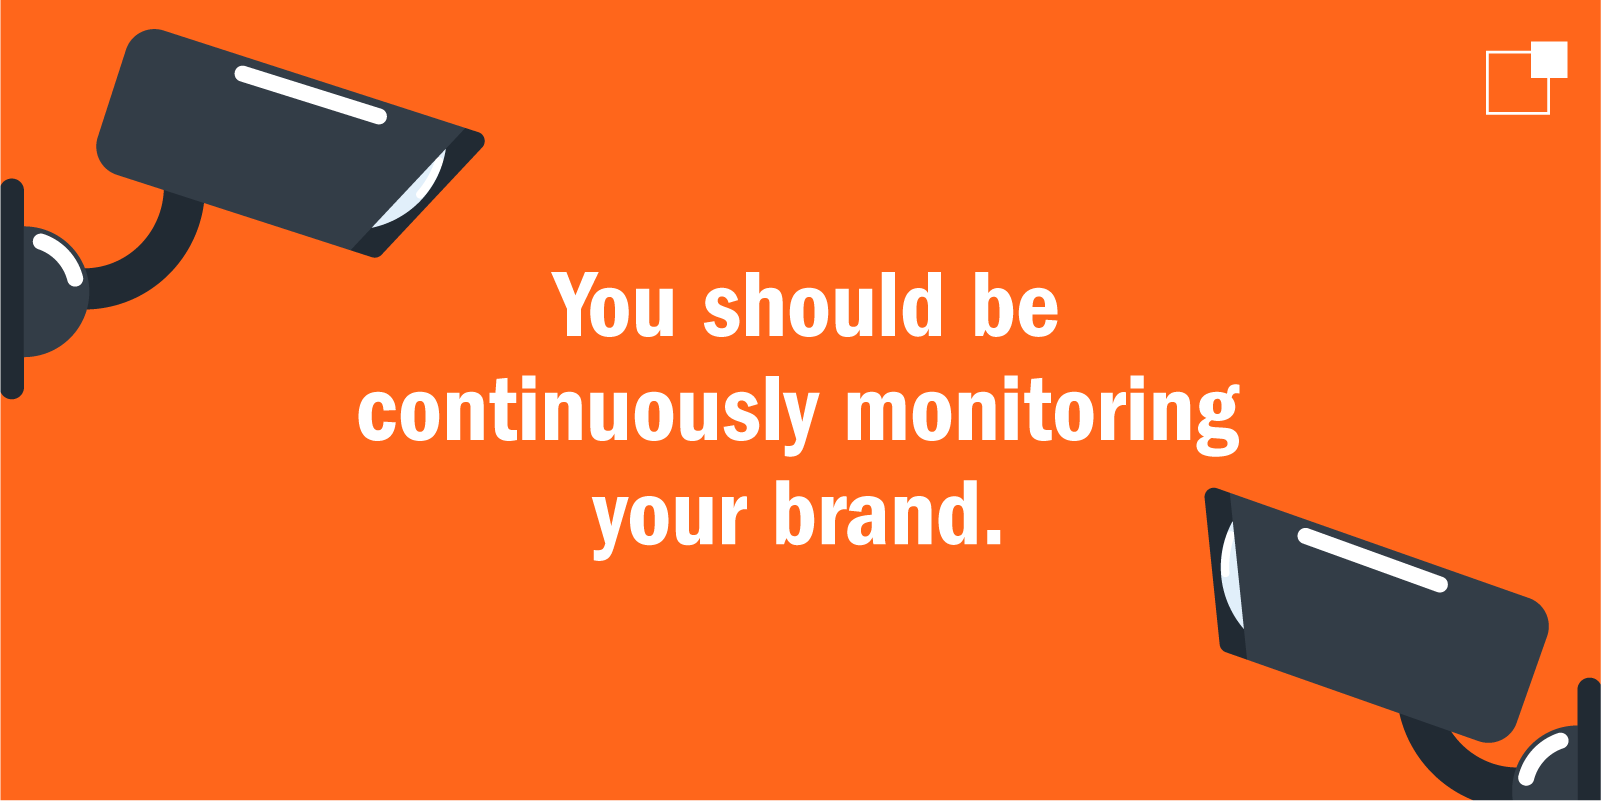 You should be continuously monitoring your brand.